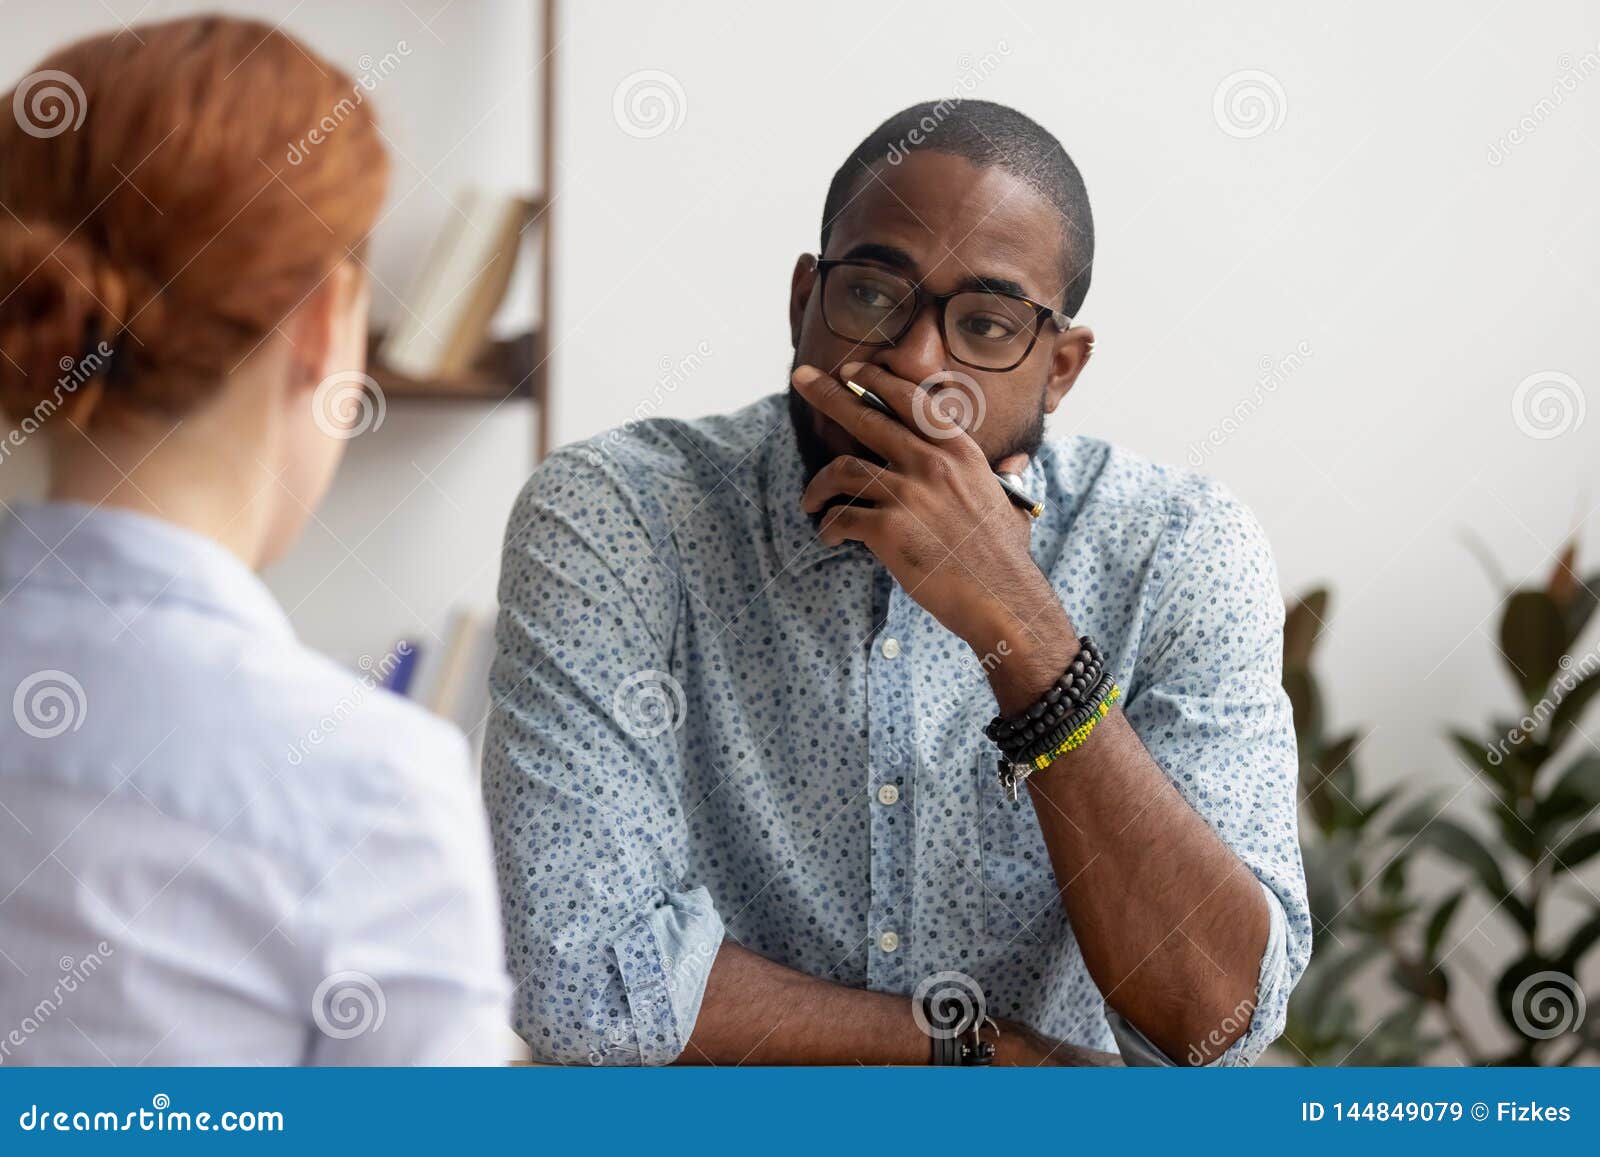 doubtful african hr talking to caucasian applicant at job interview